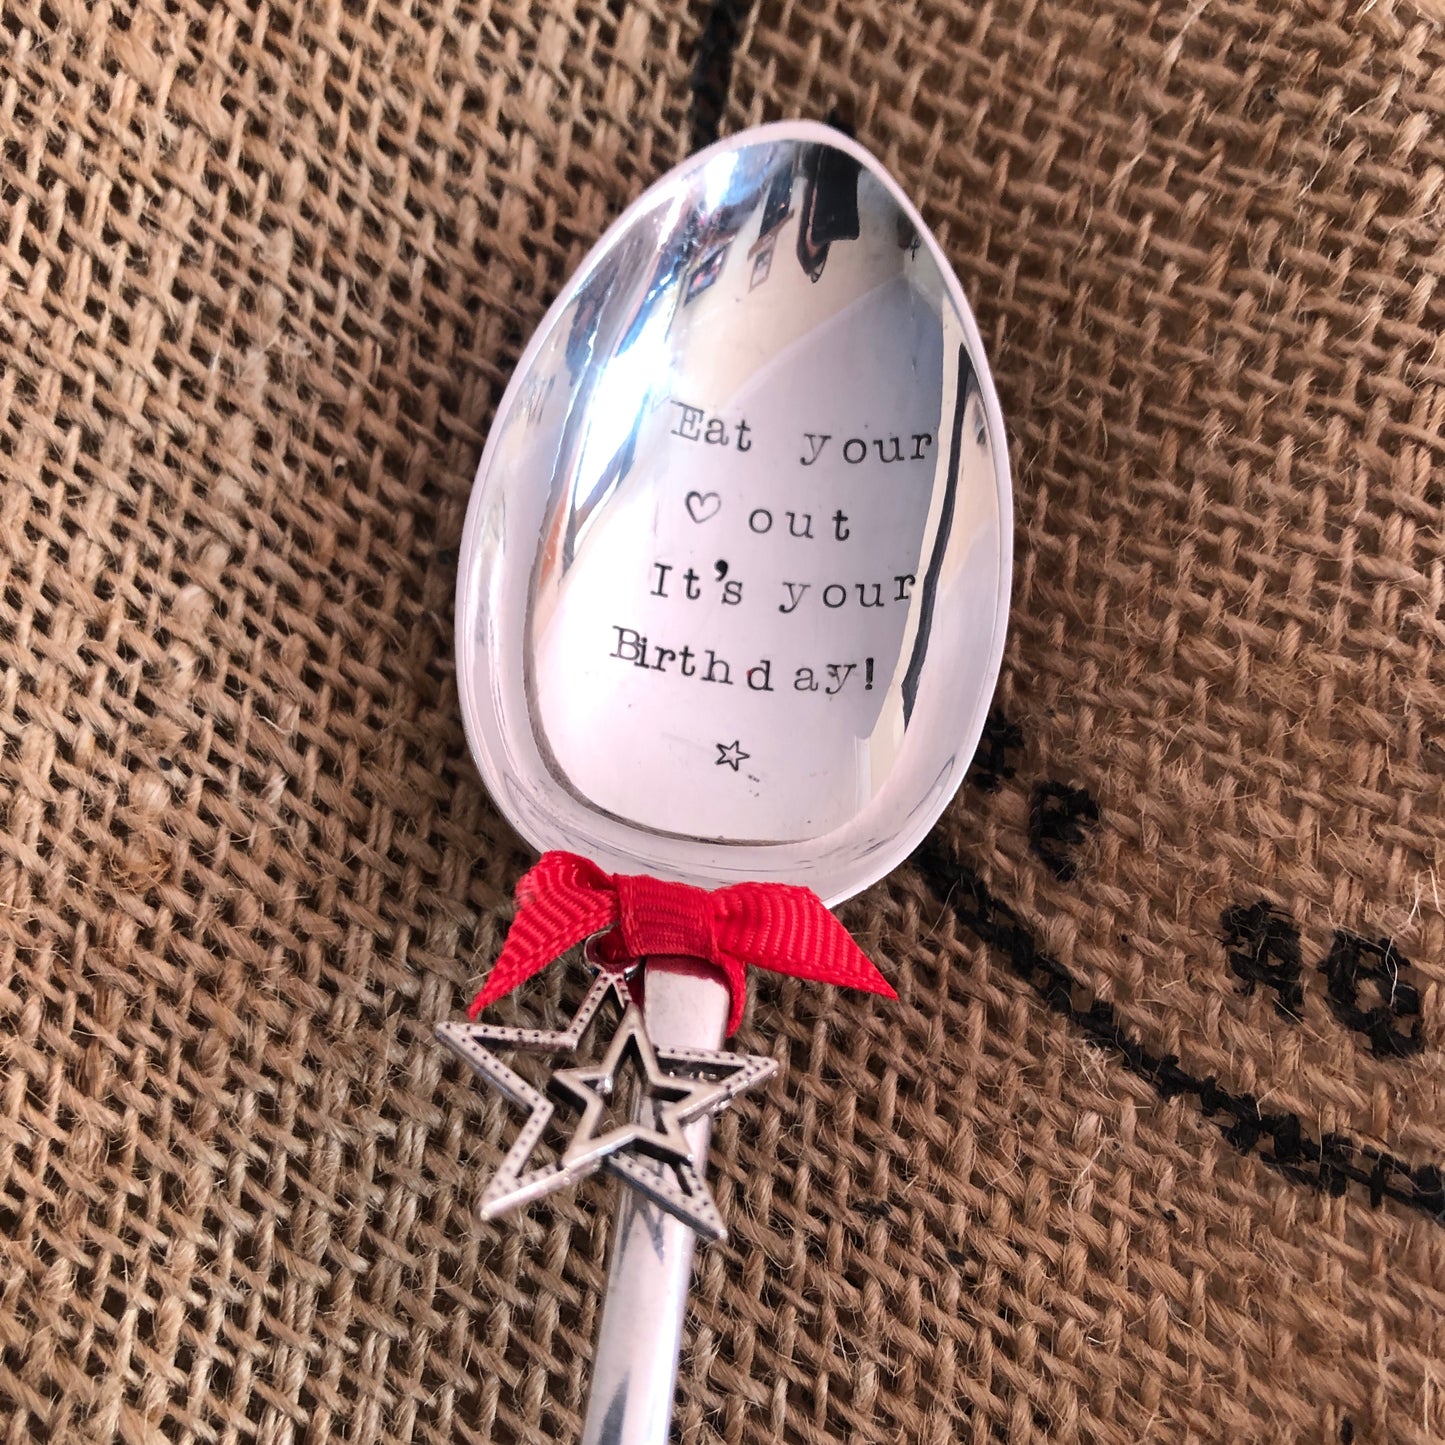 EAT YOUR HEART OUT...IT'S YOUR BIRTHDAY! - Fun Hand stamped Silver Plated Vintage Dessert/soup Spoon - Free UK shipping